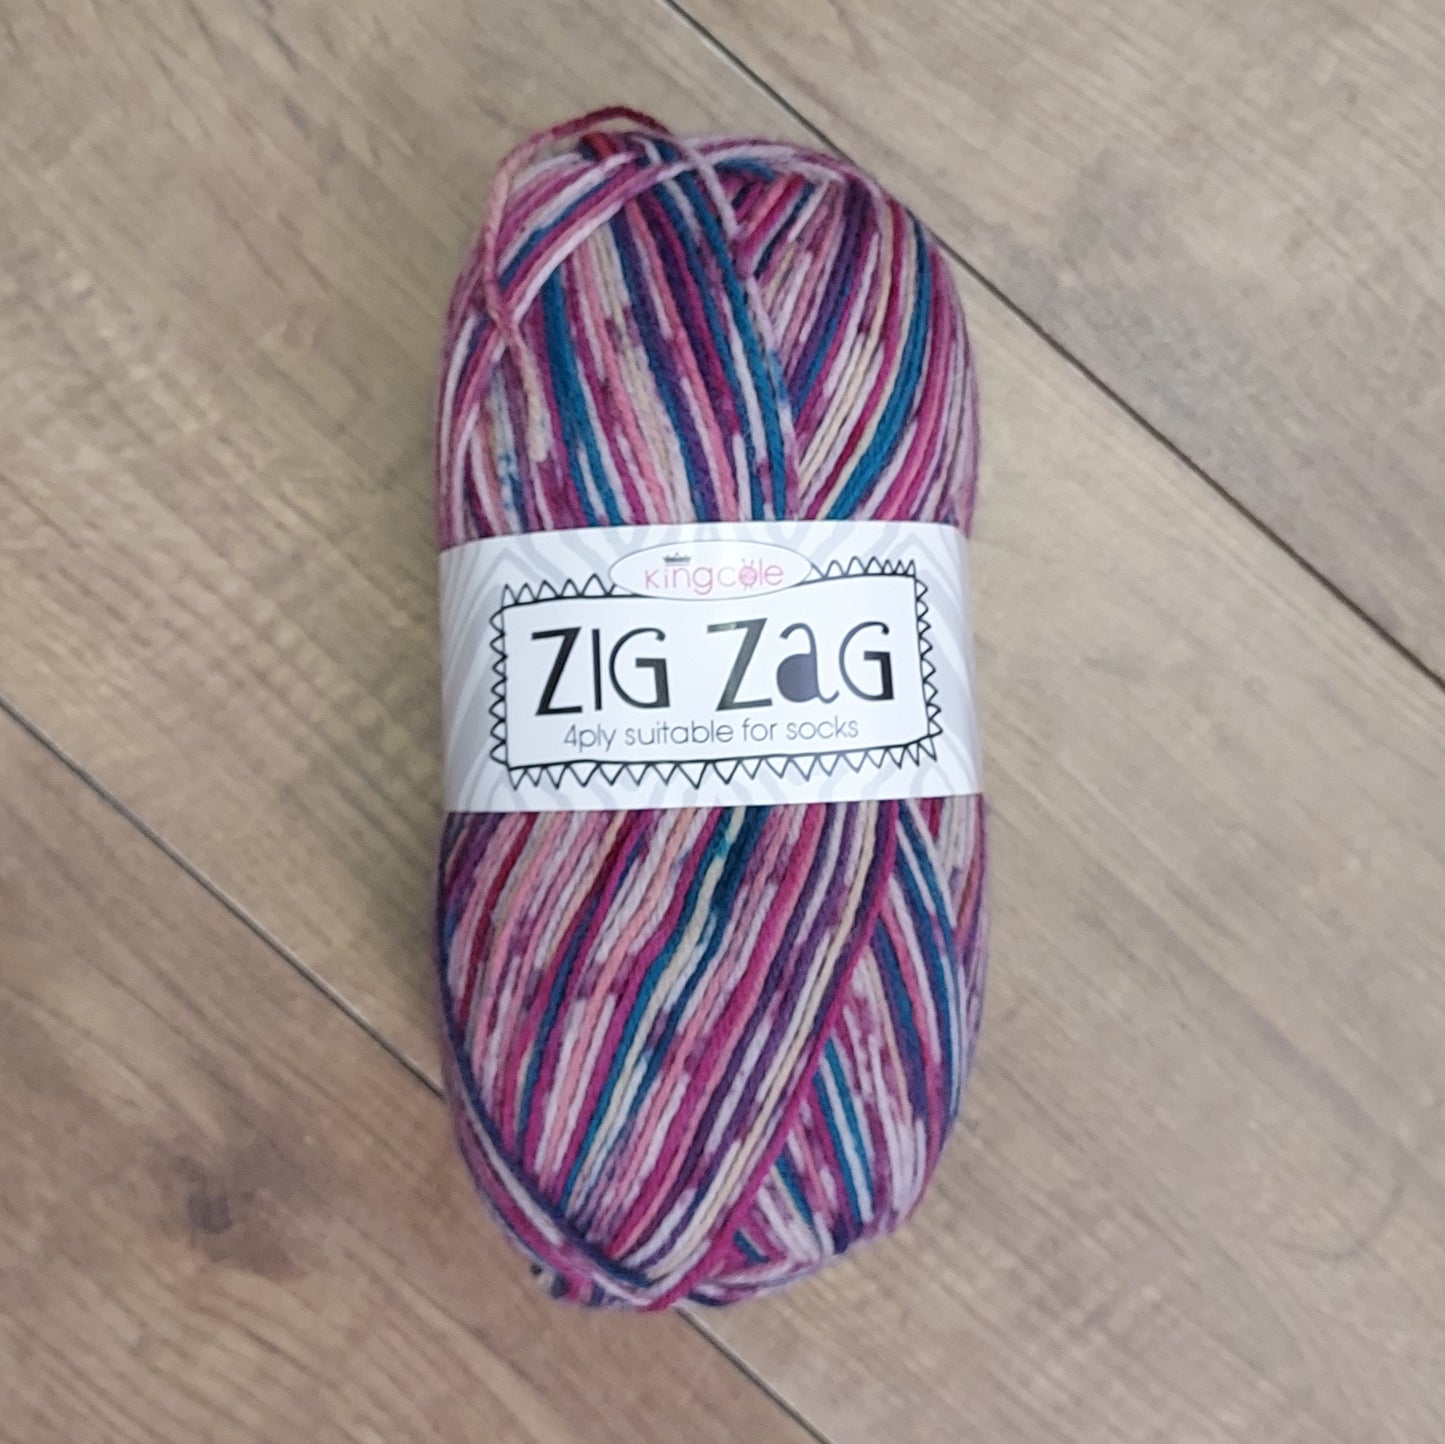 King Cole Zig Zag 4ply Wool 100g - Various Shades